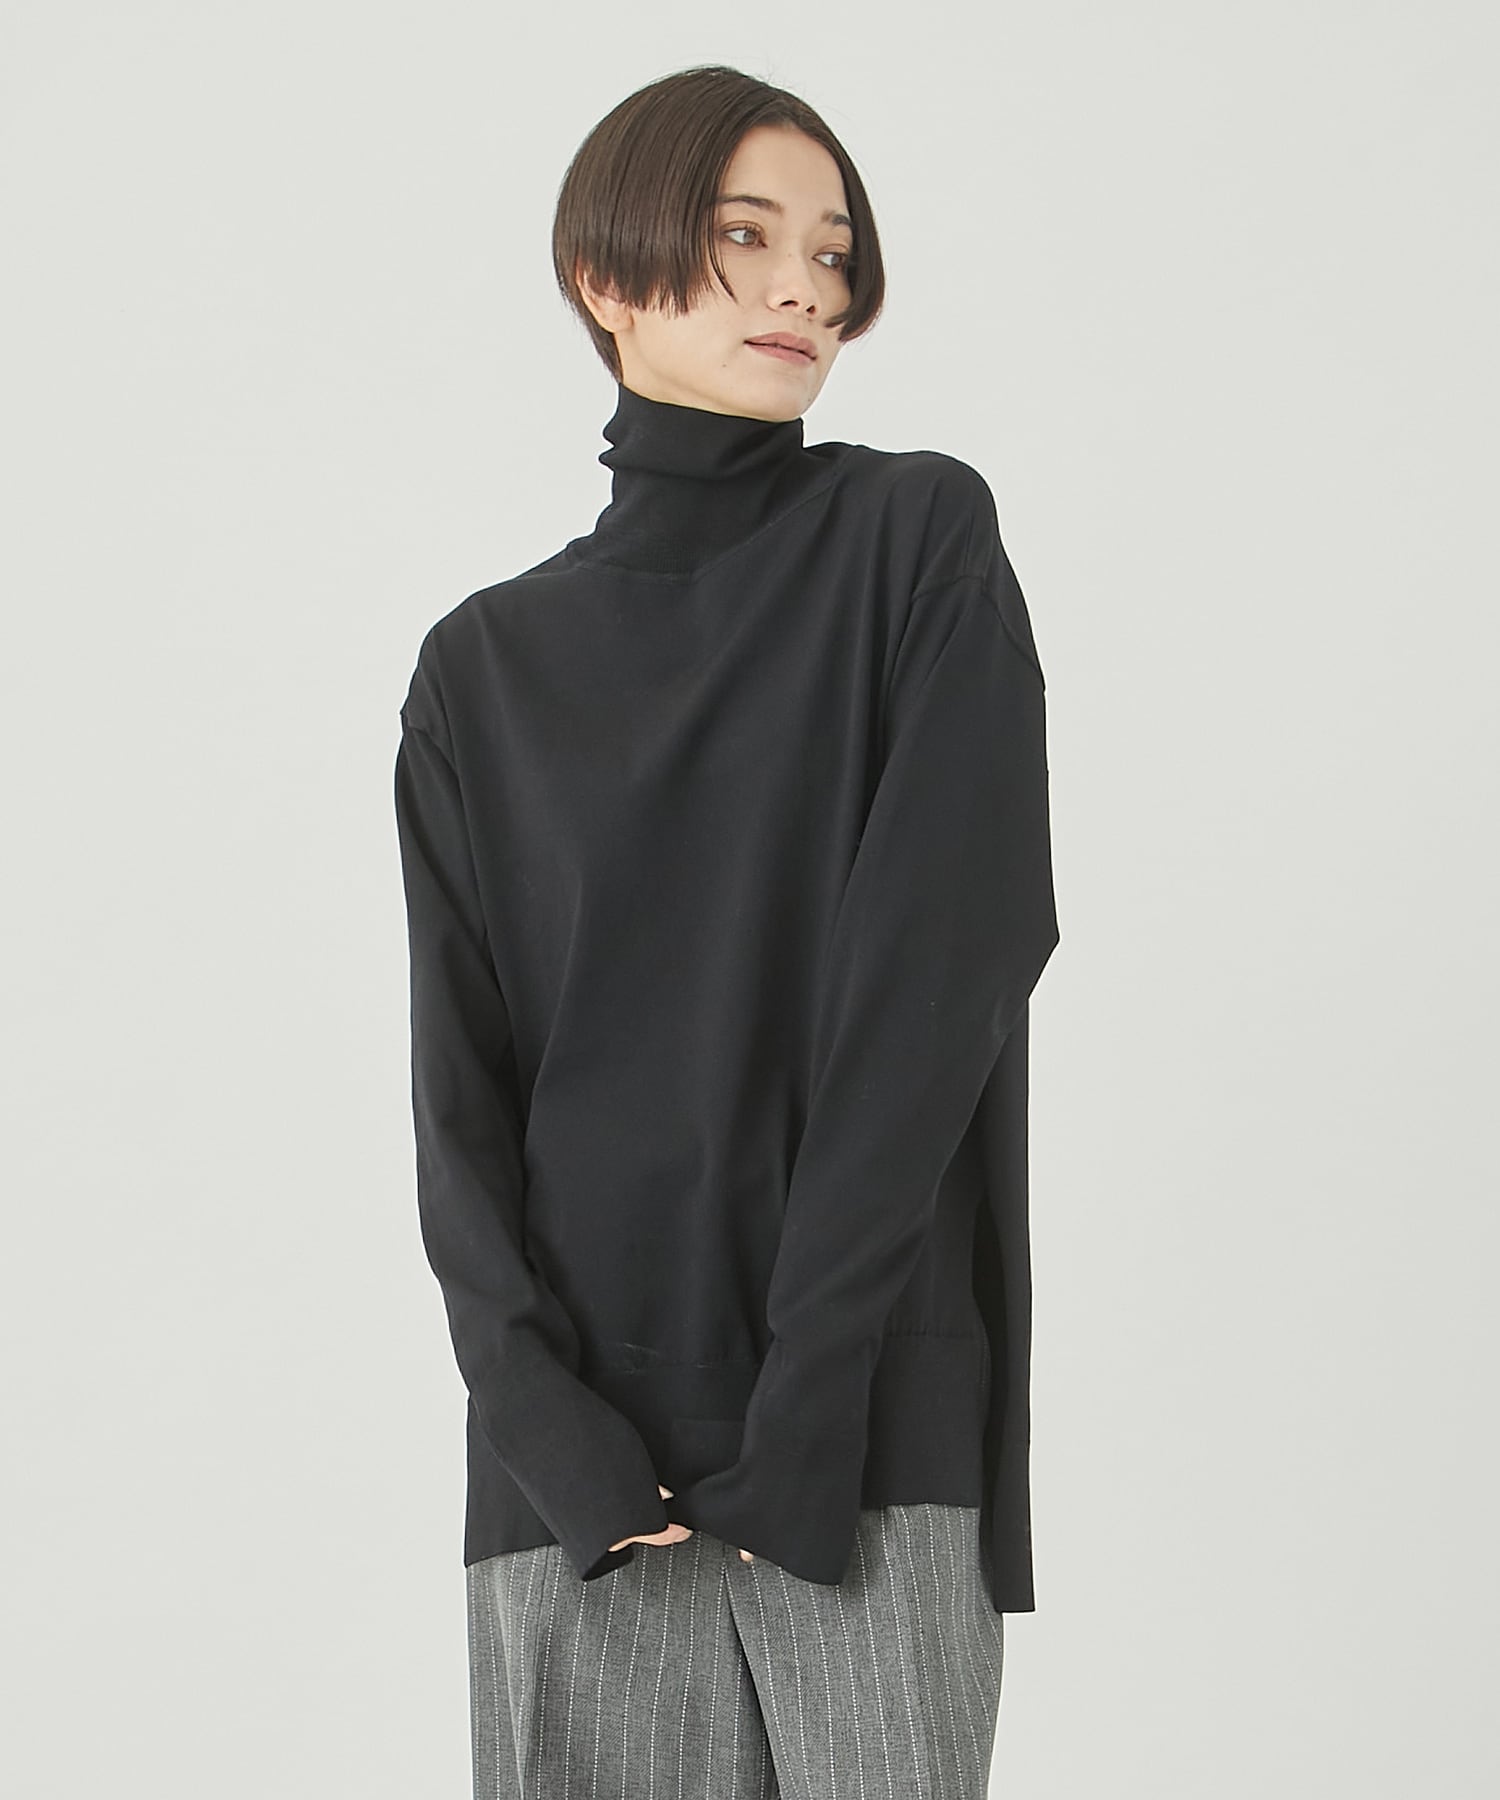 Ace66 P23 Ny11(0 BLACK): WRAPINKNOT: WOMENS｜ STUDIOUS ONLINE公式 